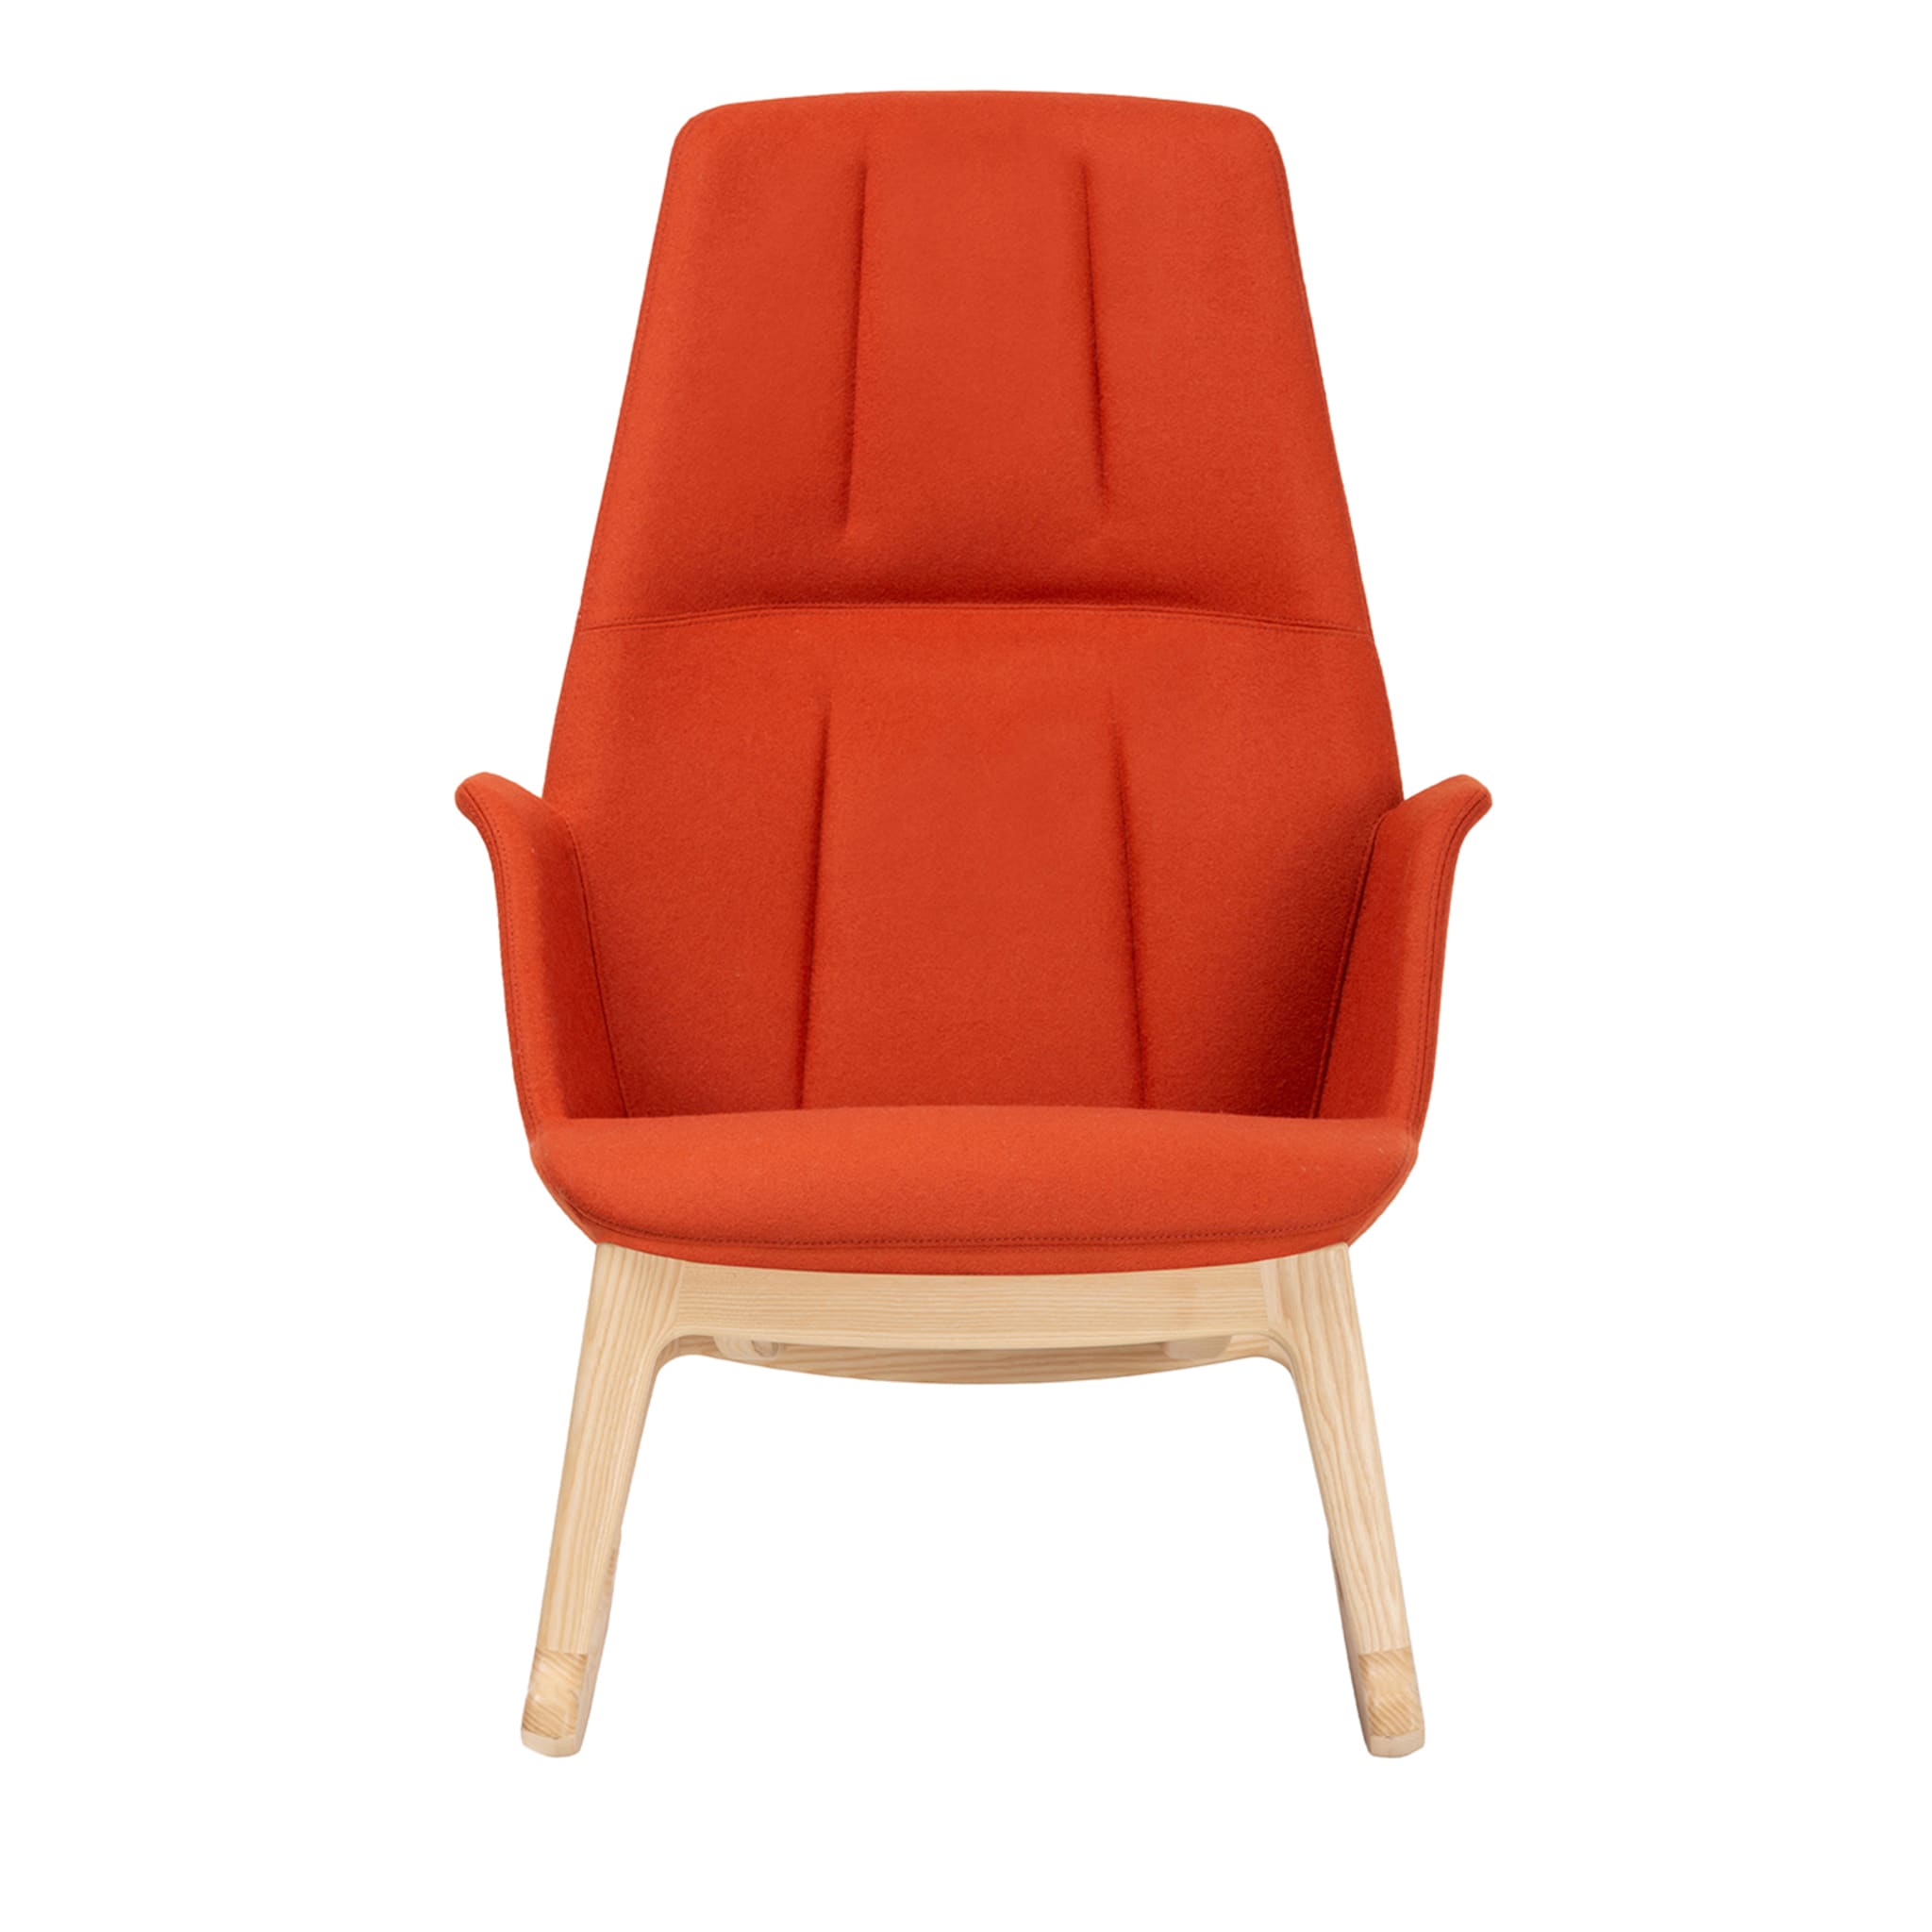 Hive Red Armchair by Camira - Main view